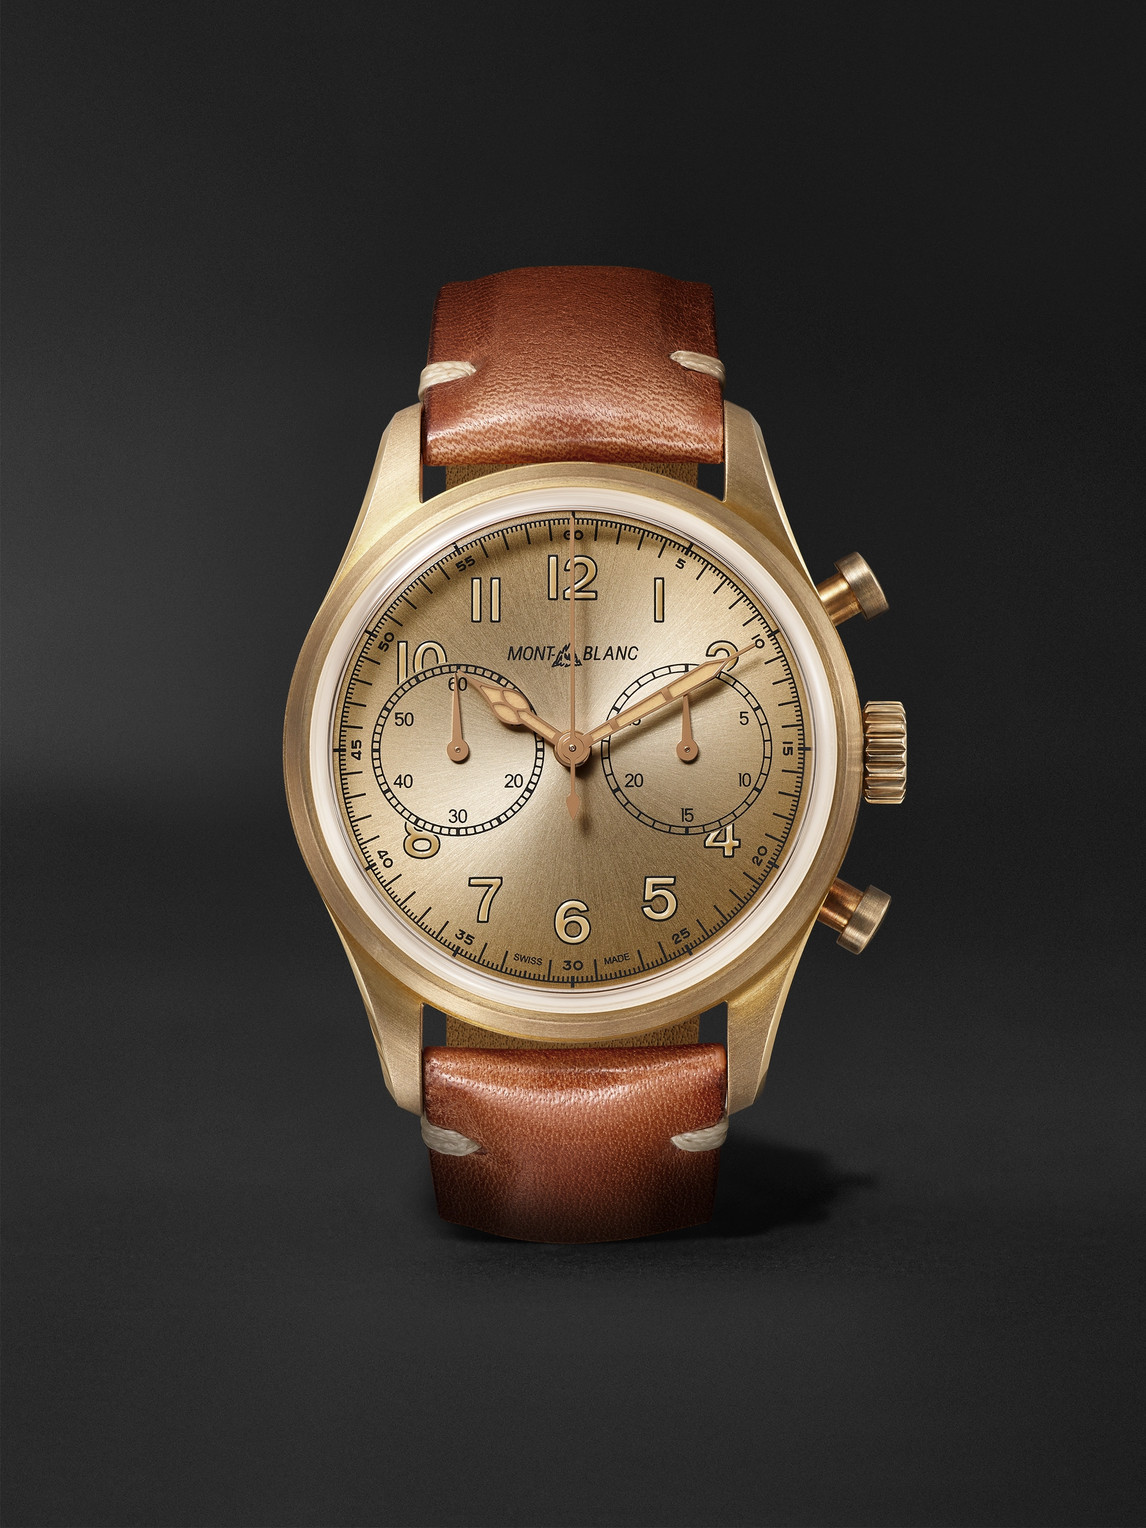 Montblanc 1858 Automatic Chronograph 42mm Bronze And Leather Watch, Ref. No. 118223 In Brown